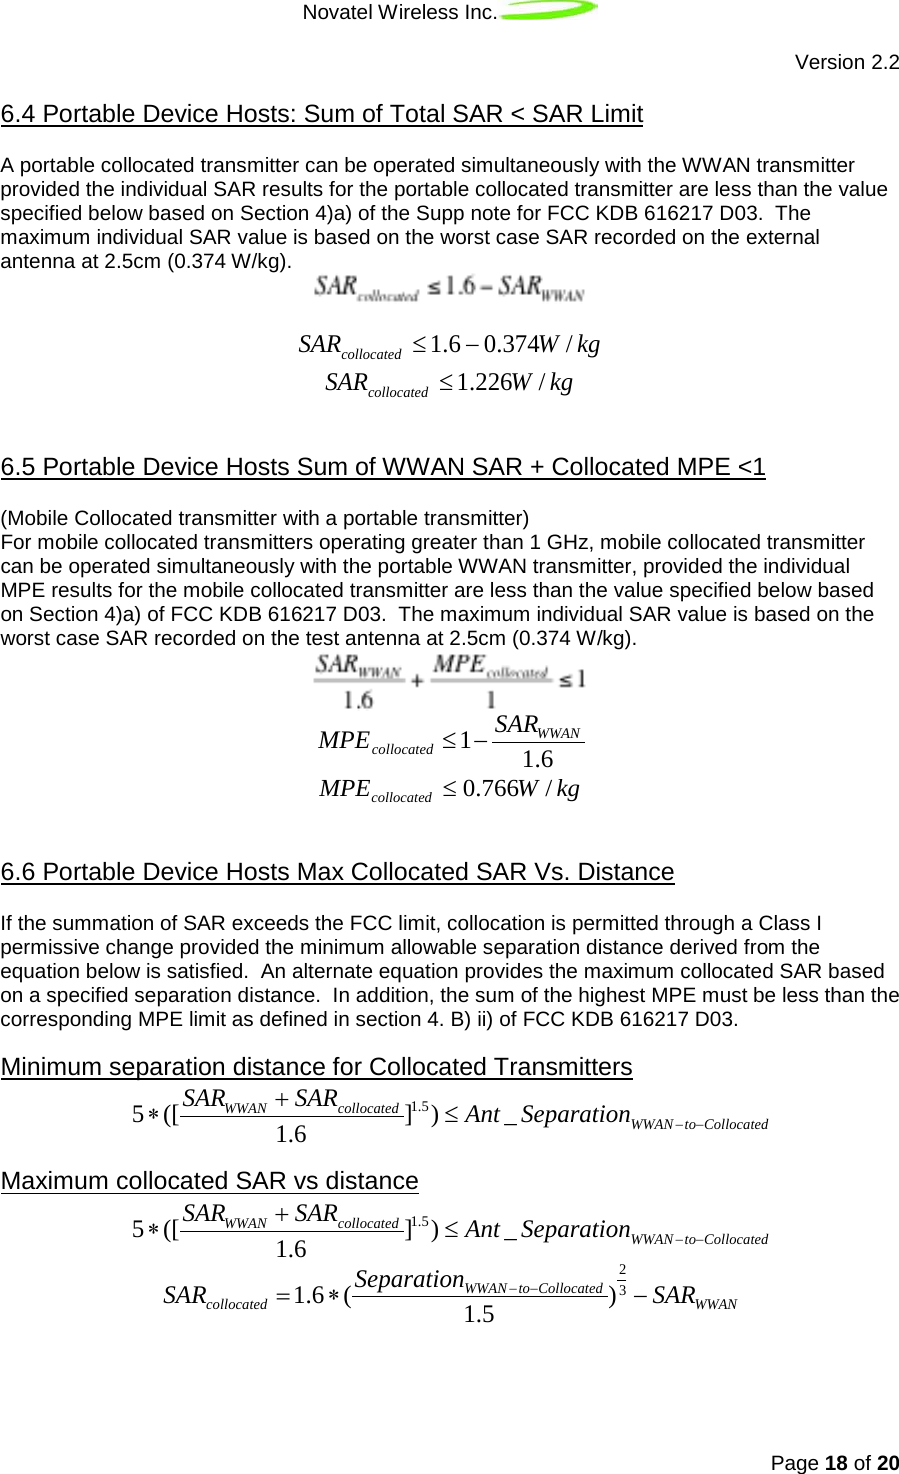 Novatel Wireless Inc.   Version 2.2 Page 18 of 20  A portable collocated transmitter can be operated simultaneously with the WWAN transmitter provided the individual SAR results for the portable collocated transmitter are less than the value specified below based on Section 4)a) of the Supp note for FCC KDB 616217 D03.  The maximum individual SAR value is based on the worst case SAR recorded on the external antenna at 2.5cm (0.374 W/kg).  6.4 Portable Device Hosts: Sum of Total SAR &lt; SAR Limit   kgWSARcollocated/374.06.1 −≤ kgWSARcollocated /226.1≤  (Mobile Collocated transmitter with a portable transmitter) 6.5 Portable Device Hosts Sum of WWAN SAR + Collocated MPE &lt;1  For mobile collocated transmitters operating greater than 1 GHz, mobile collocated transmitter can be operated simultaneously with the portable WWAN transmitter, provided the individual MPE results for the mobile collocated transmitter are less than the value specified below based on Section 4)a) of FCC KDB 616217 D03.  The maximum individual SAR value is based on the worst case SAR recorded on the test antenna at 2.5cm (0.374 W/kg).    MPEcollocated≤1−SARWWAN1.6 kgWMPEcollocated /766.0≤  If the summation of SAR exceeds the FCC limit, collocation is permitted through a Class I permissive change provided the minimum allowable separation distance derived from the equation below is satisfied.  An alternate equation provides the maximum collocated SAR based on a specified separation distance.  In addition, the sum of the highest MPE must be less than the corresponding MPE limit as defined in section 4. B) ii) of FCC KDB 616217 D03. 6.6 Portable Device Hosts Max Collocated SAR Vs. Distance   5∗([SARWWAN +SARcollocated1.6 ]1.5)≤Ant _SeparationWWAN −to−CollocatedMinimum separation distance for Collocated Transmitters   5∗([SARWWAN +SARcollocated1.6 ]1.5)≤Ant _SeparationWWAN −to−CollocatedMaximum collocated SAR vs distance   SARcollocated=1.6∗(SeparationWWAN −to−Collocated1.5 )23−SARWWAN 